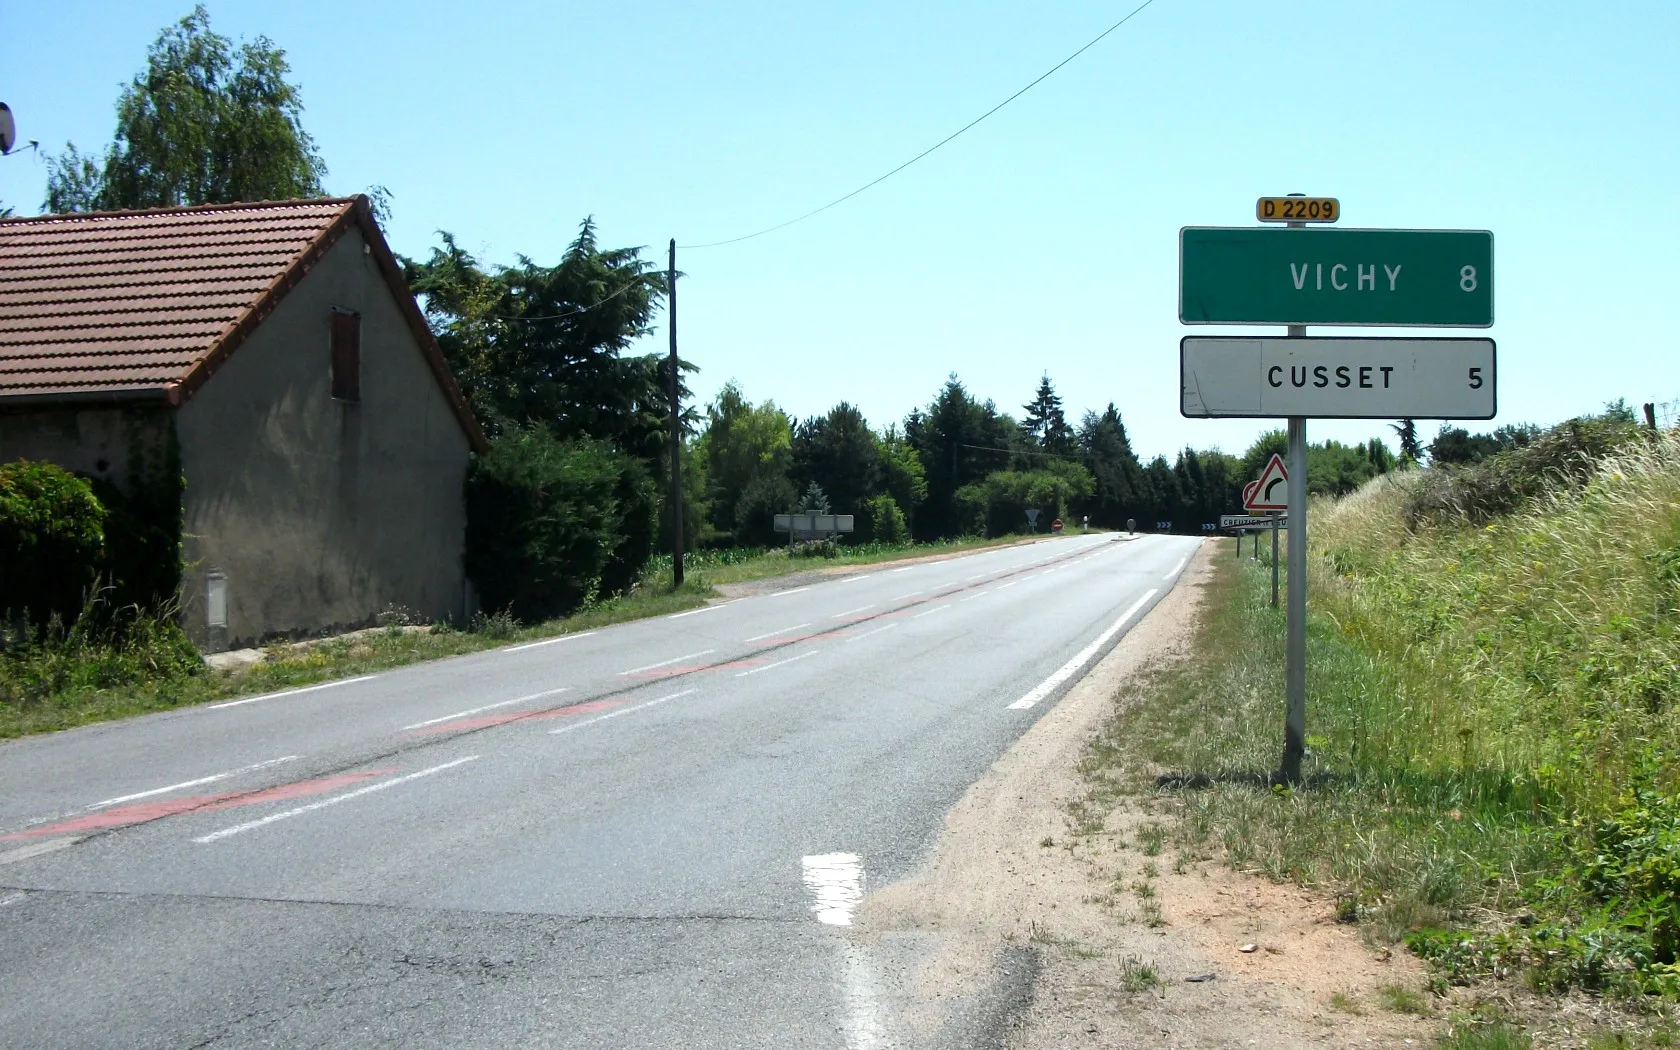 Photo showing: Departmental road 2209 at exit of Creuzier-le-Neuf, Allier, Auvergne, France, towards Vichy (directional road signs made in 1985).